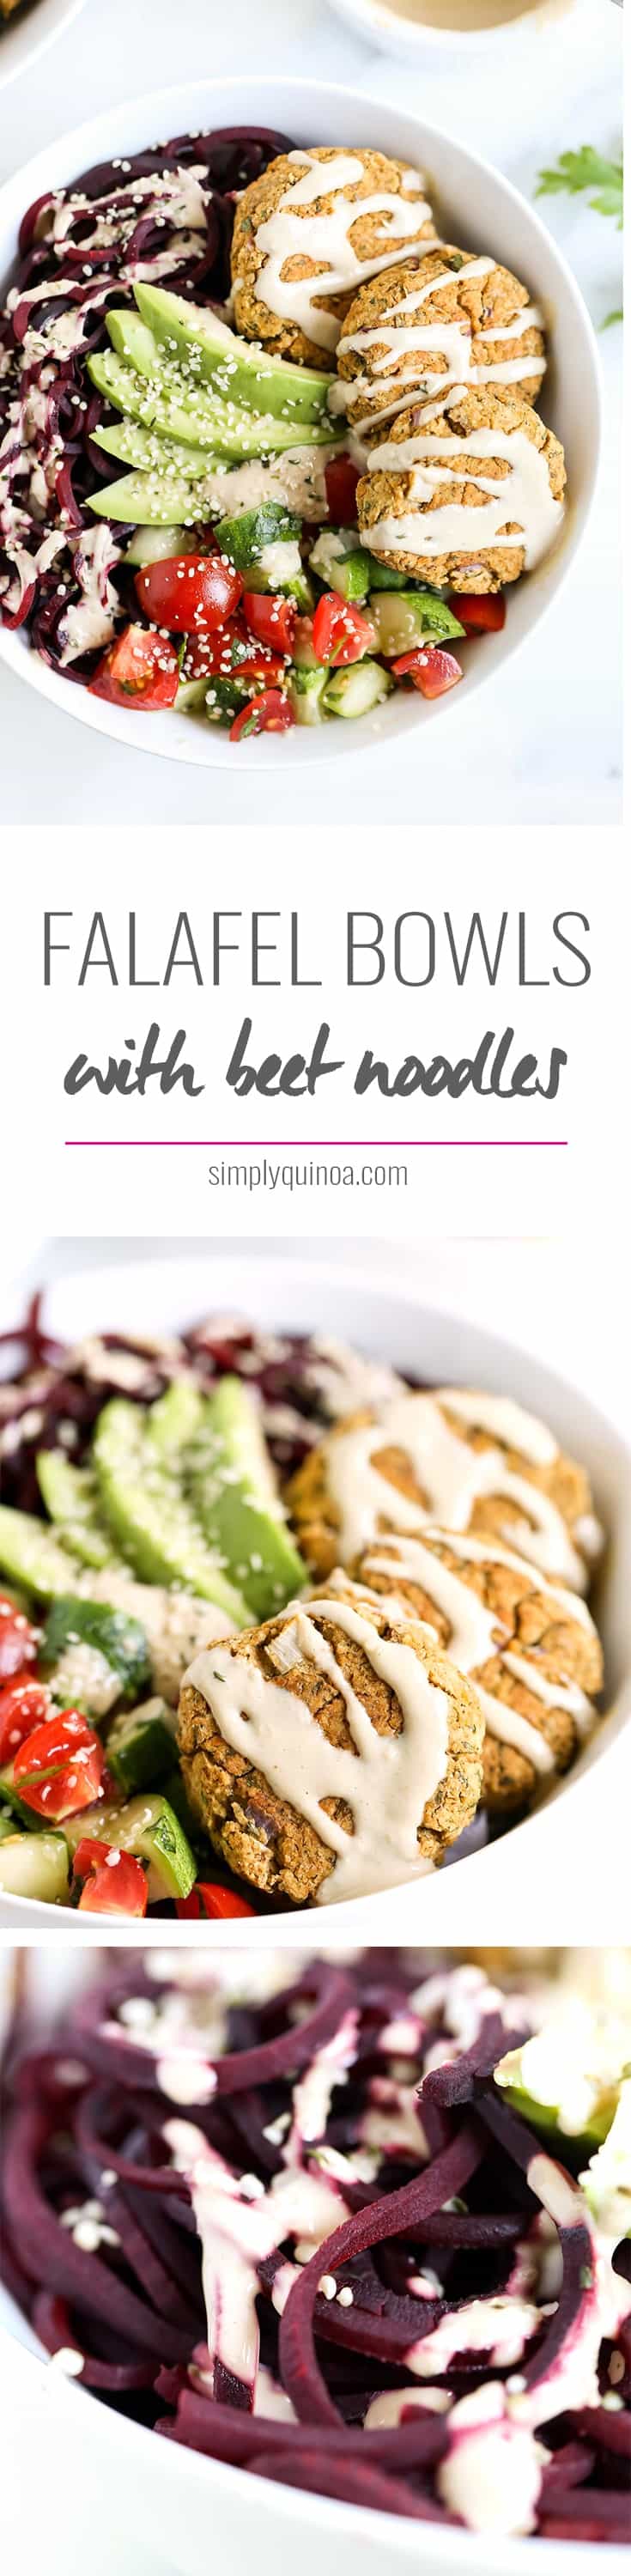 VEGETARIAN FALAFEL BOWLS with beet noodles. cucumbers, tomatoes and a creamy tahini dressing!